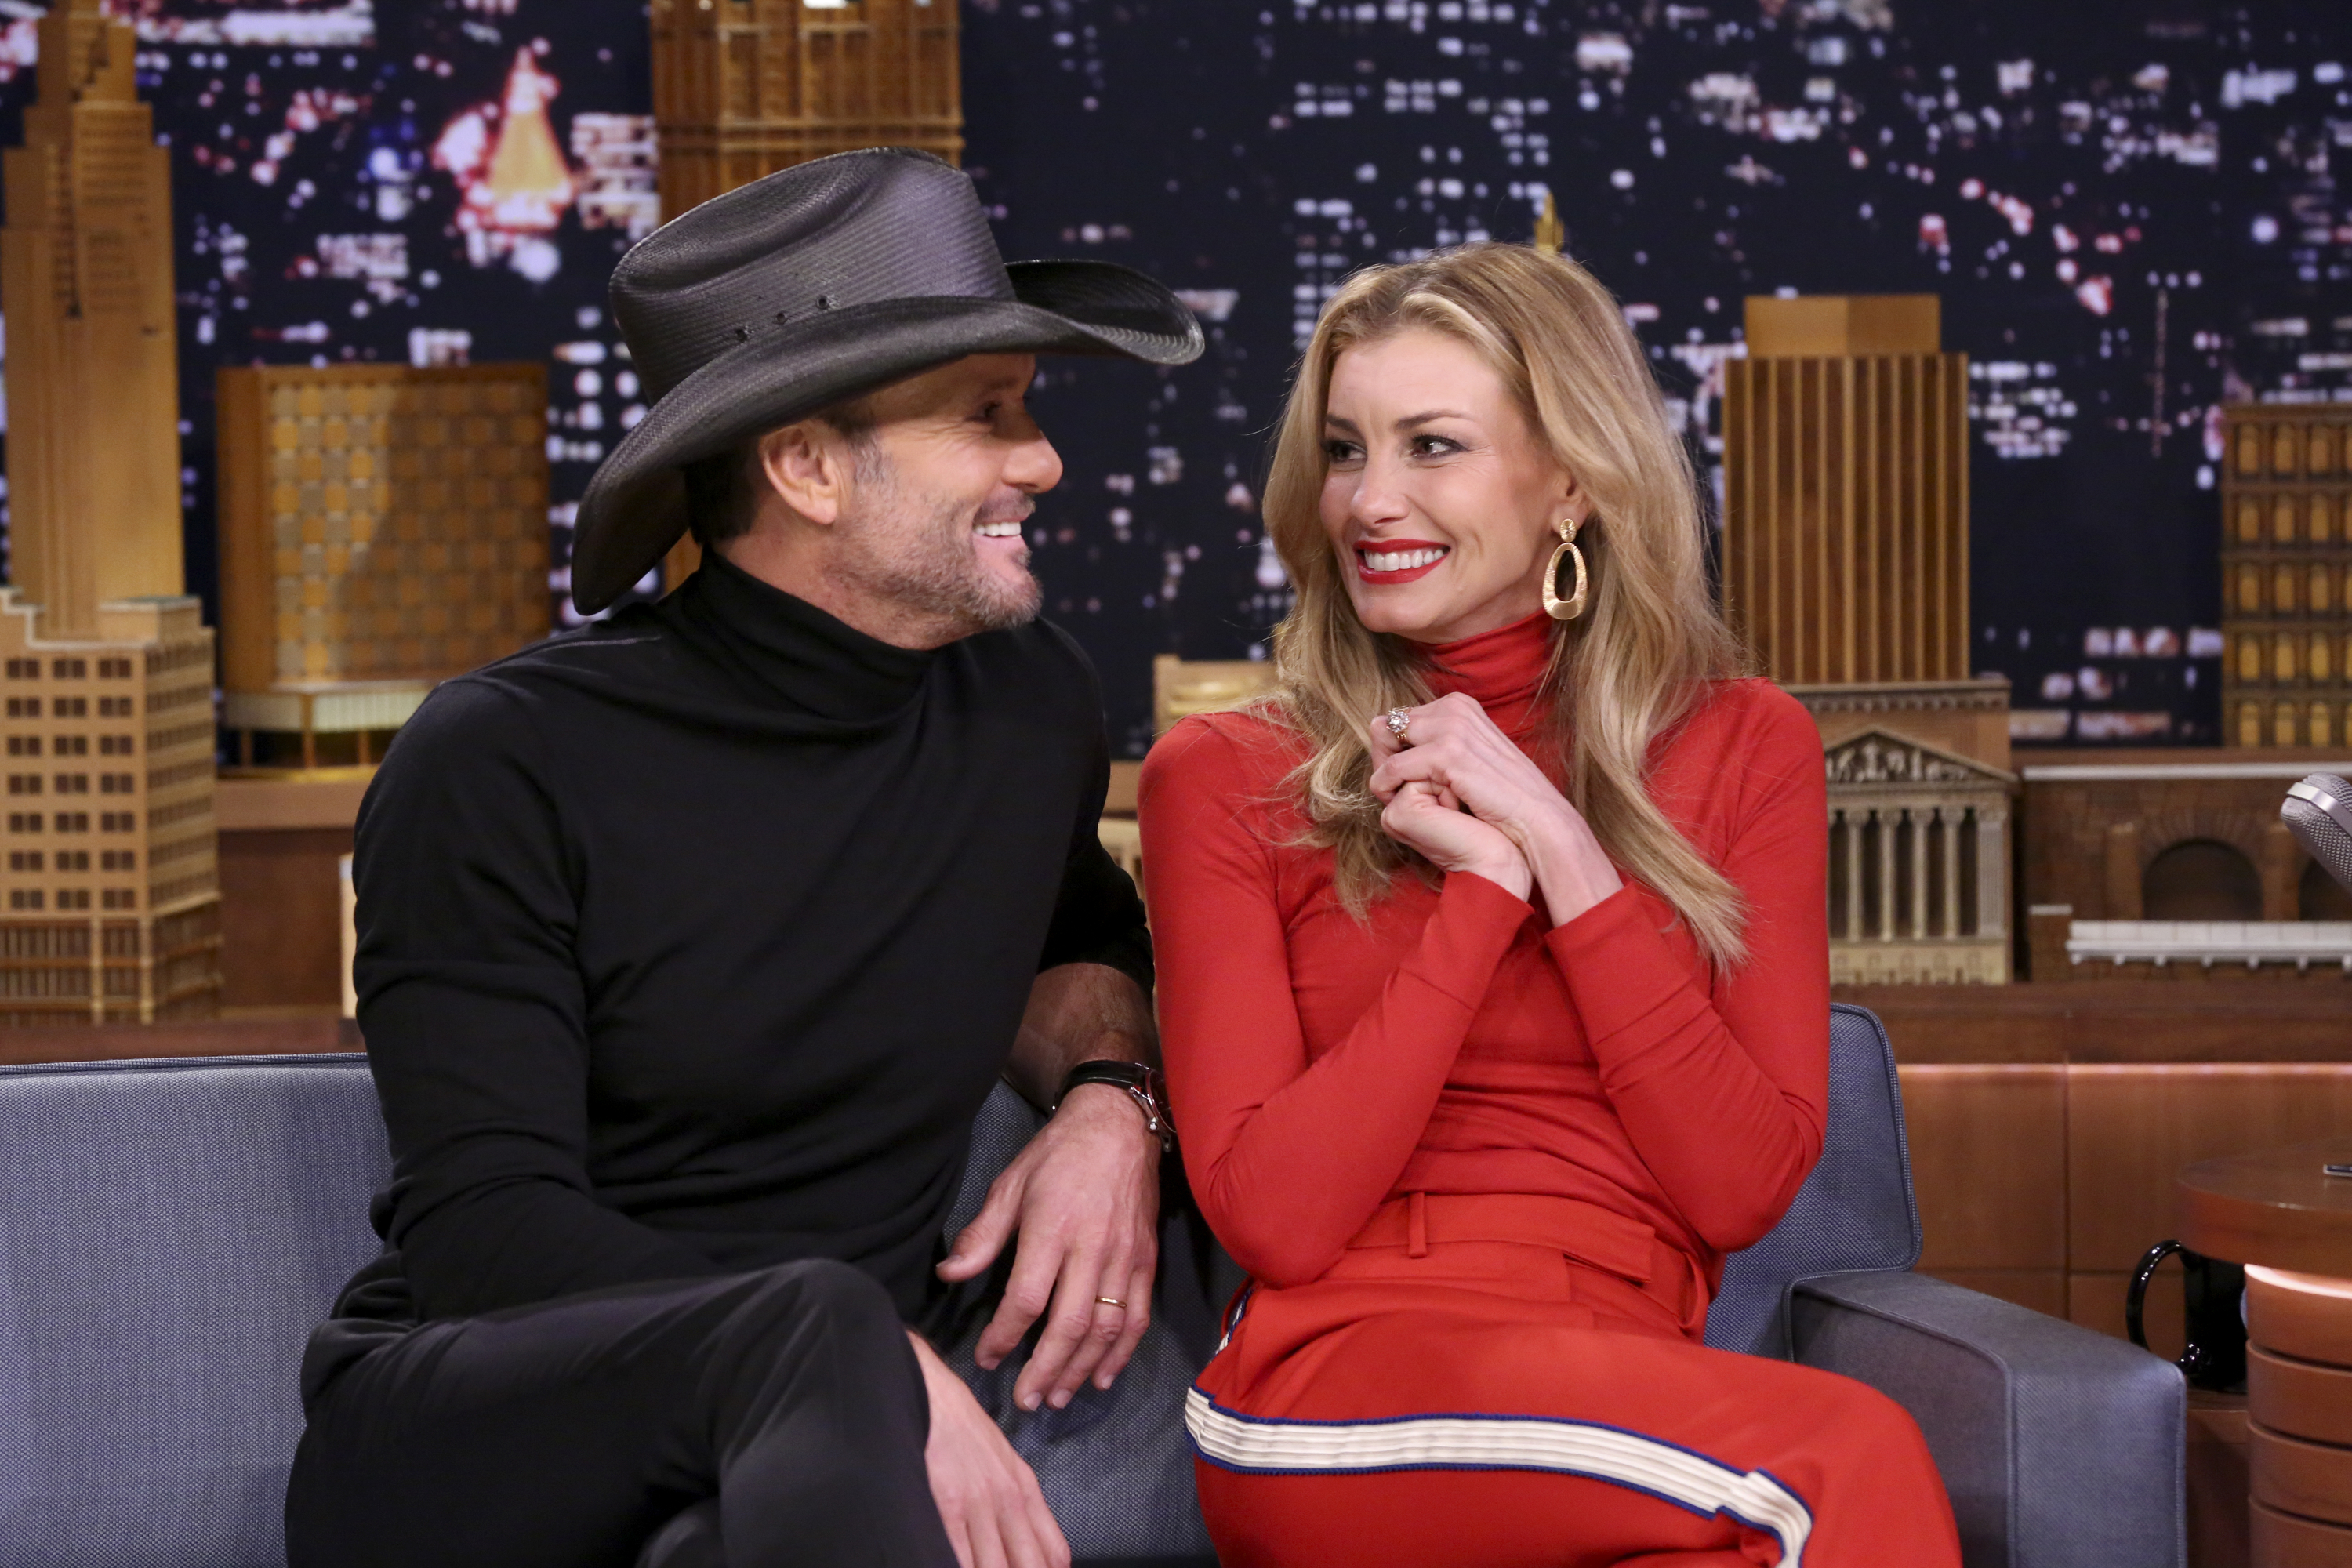 Tim McGraw and Faith Hill during an interview on November 16, 2017 | Source: Getty Images